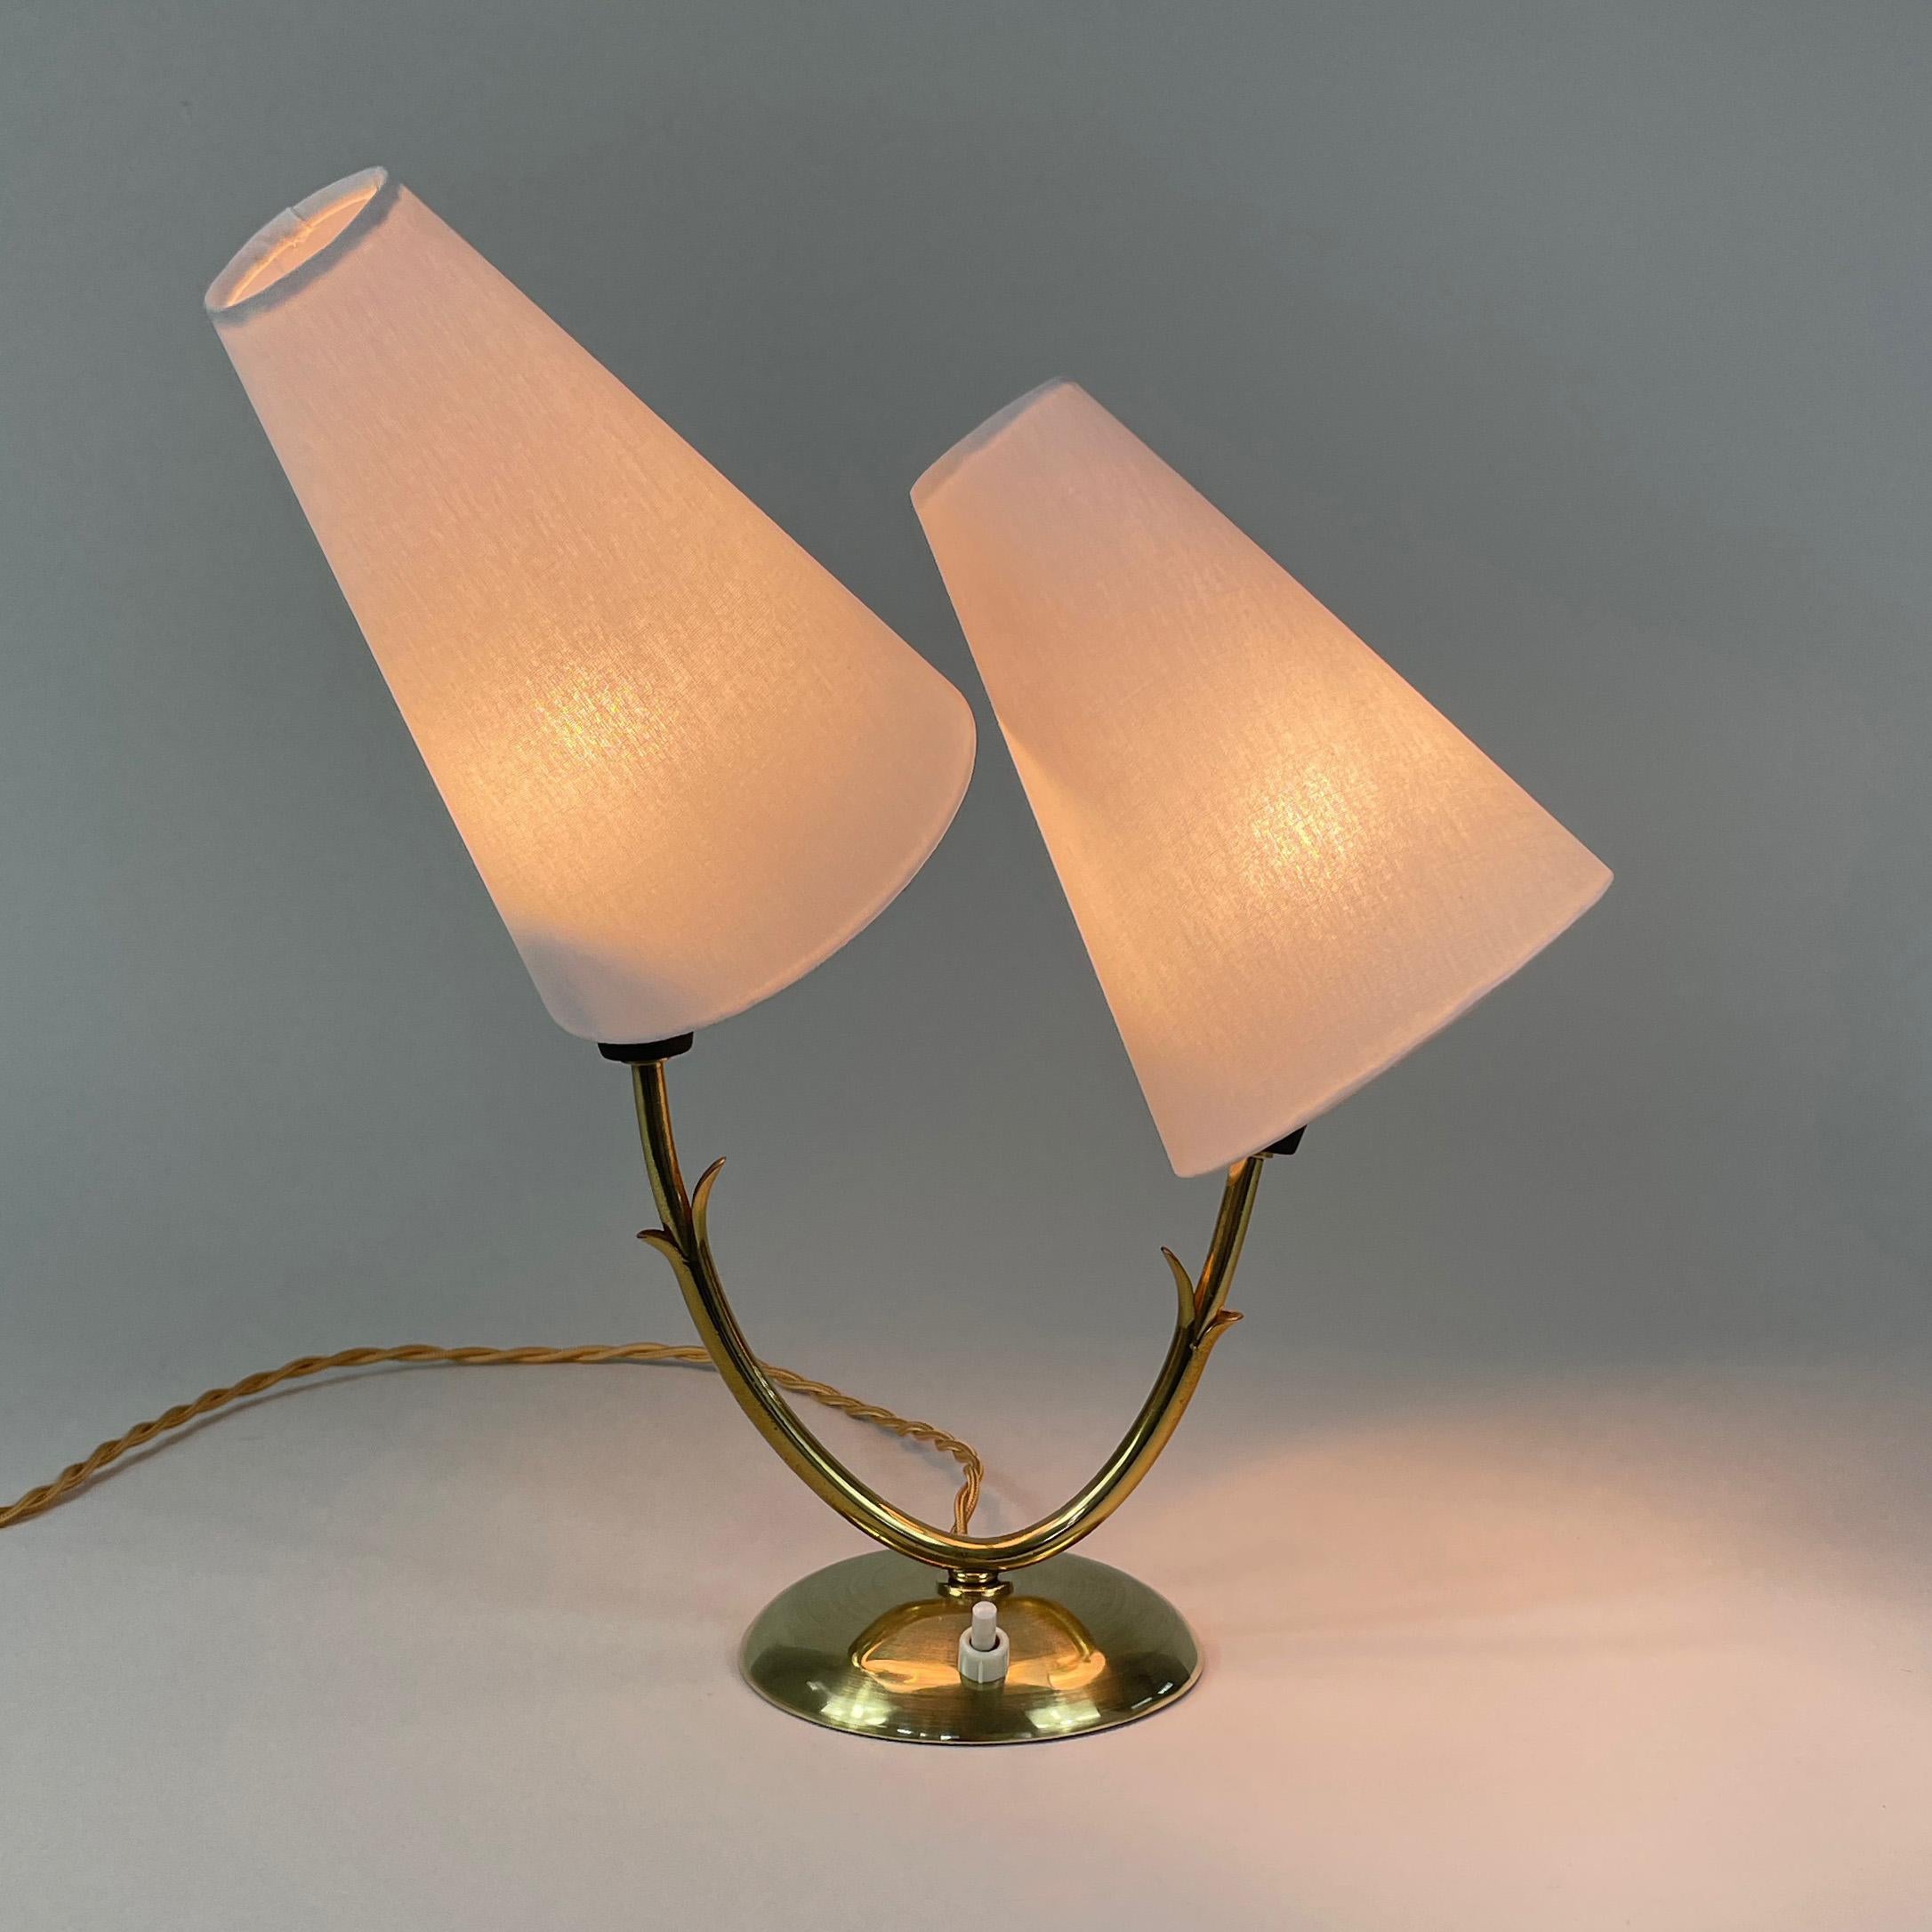 Double Arm Brass Table Lamp, Sweden 1950s For Sale 5